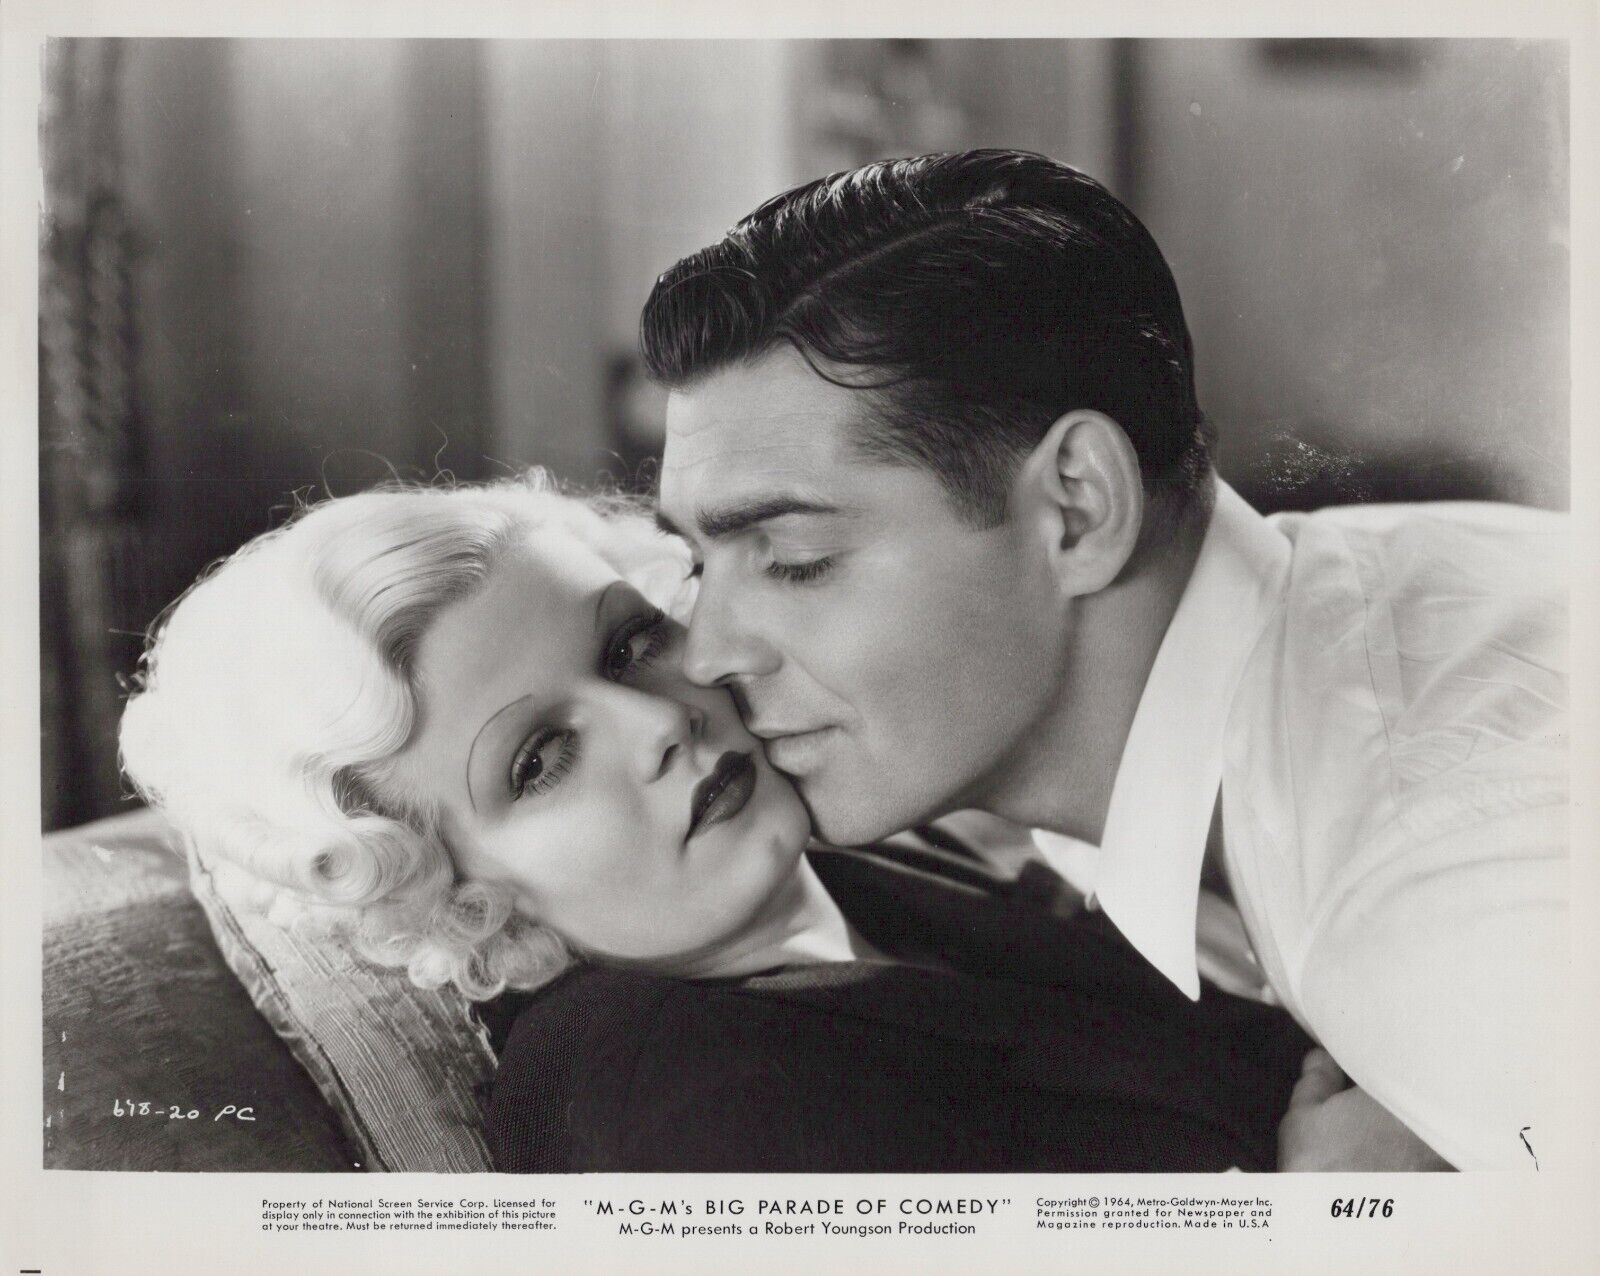 Jean Harlow + Clark Gable in The Big Parade of Comedy (1964) ❤ MGM Photo K 387